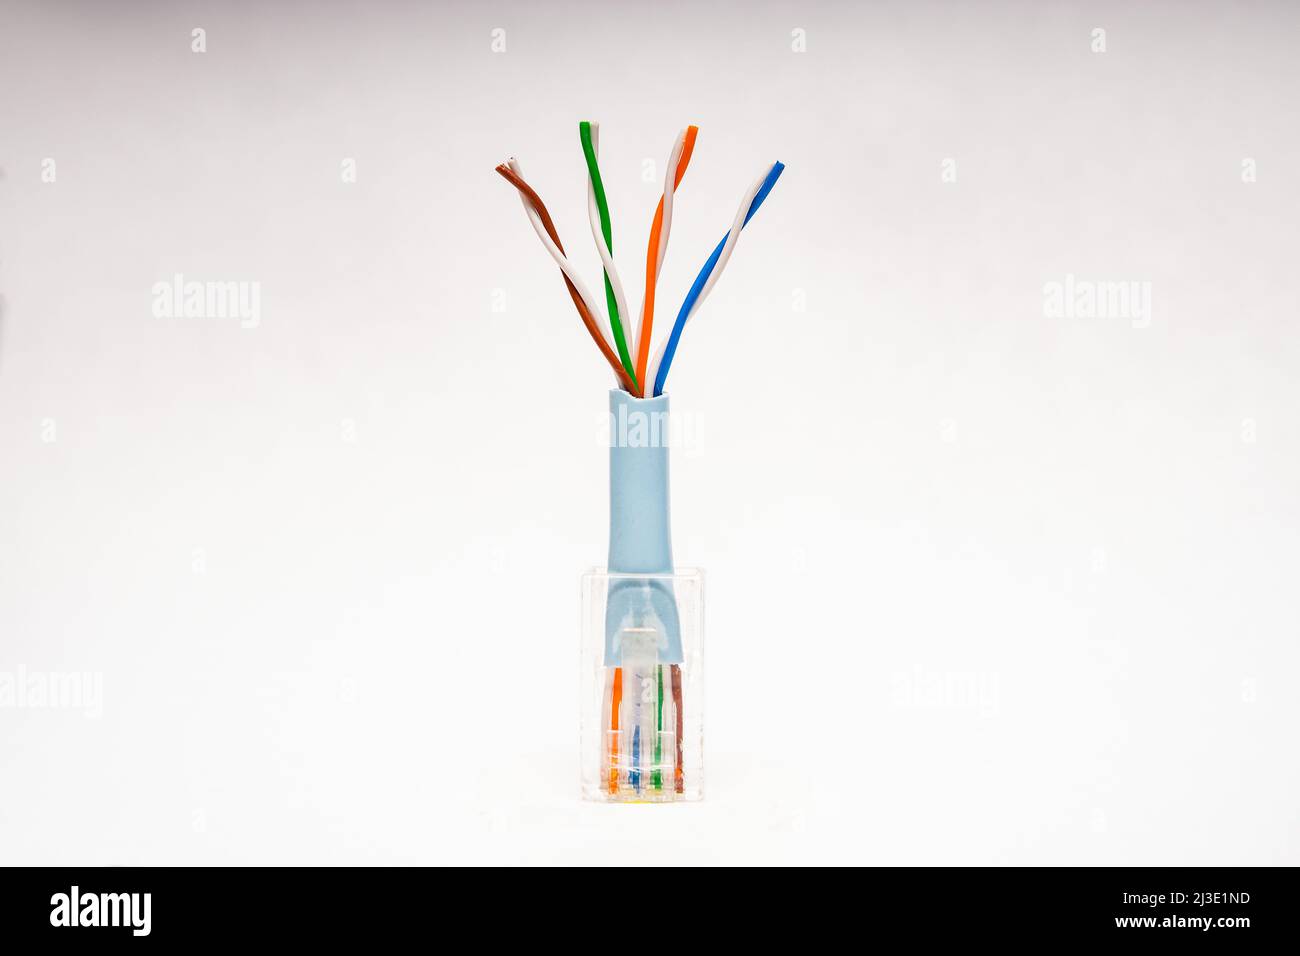 An Rj 45 Connector with Category 5 color coded twisted pair wires used for computer networks Stock Photo